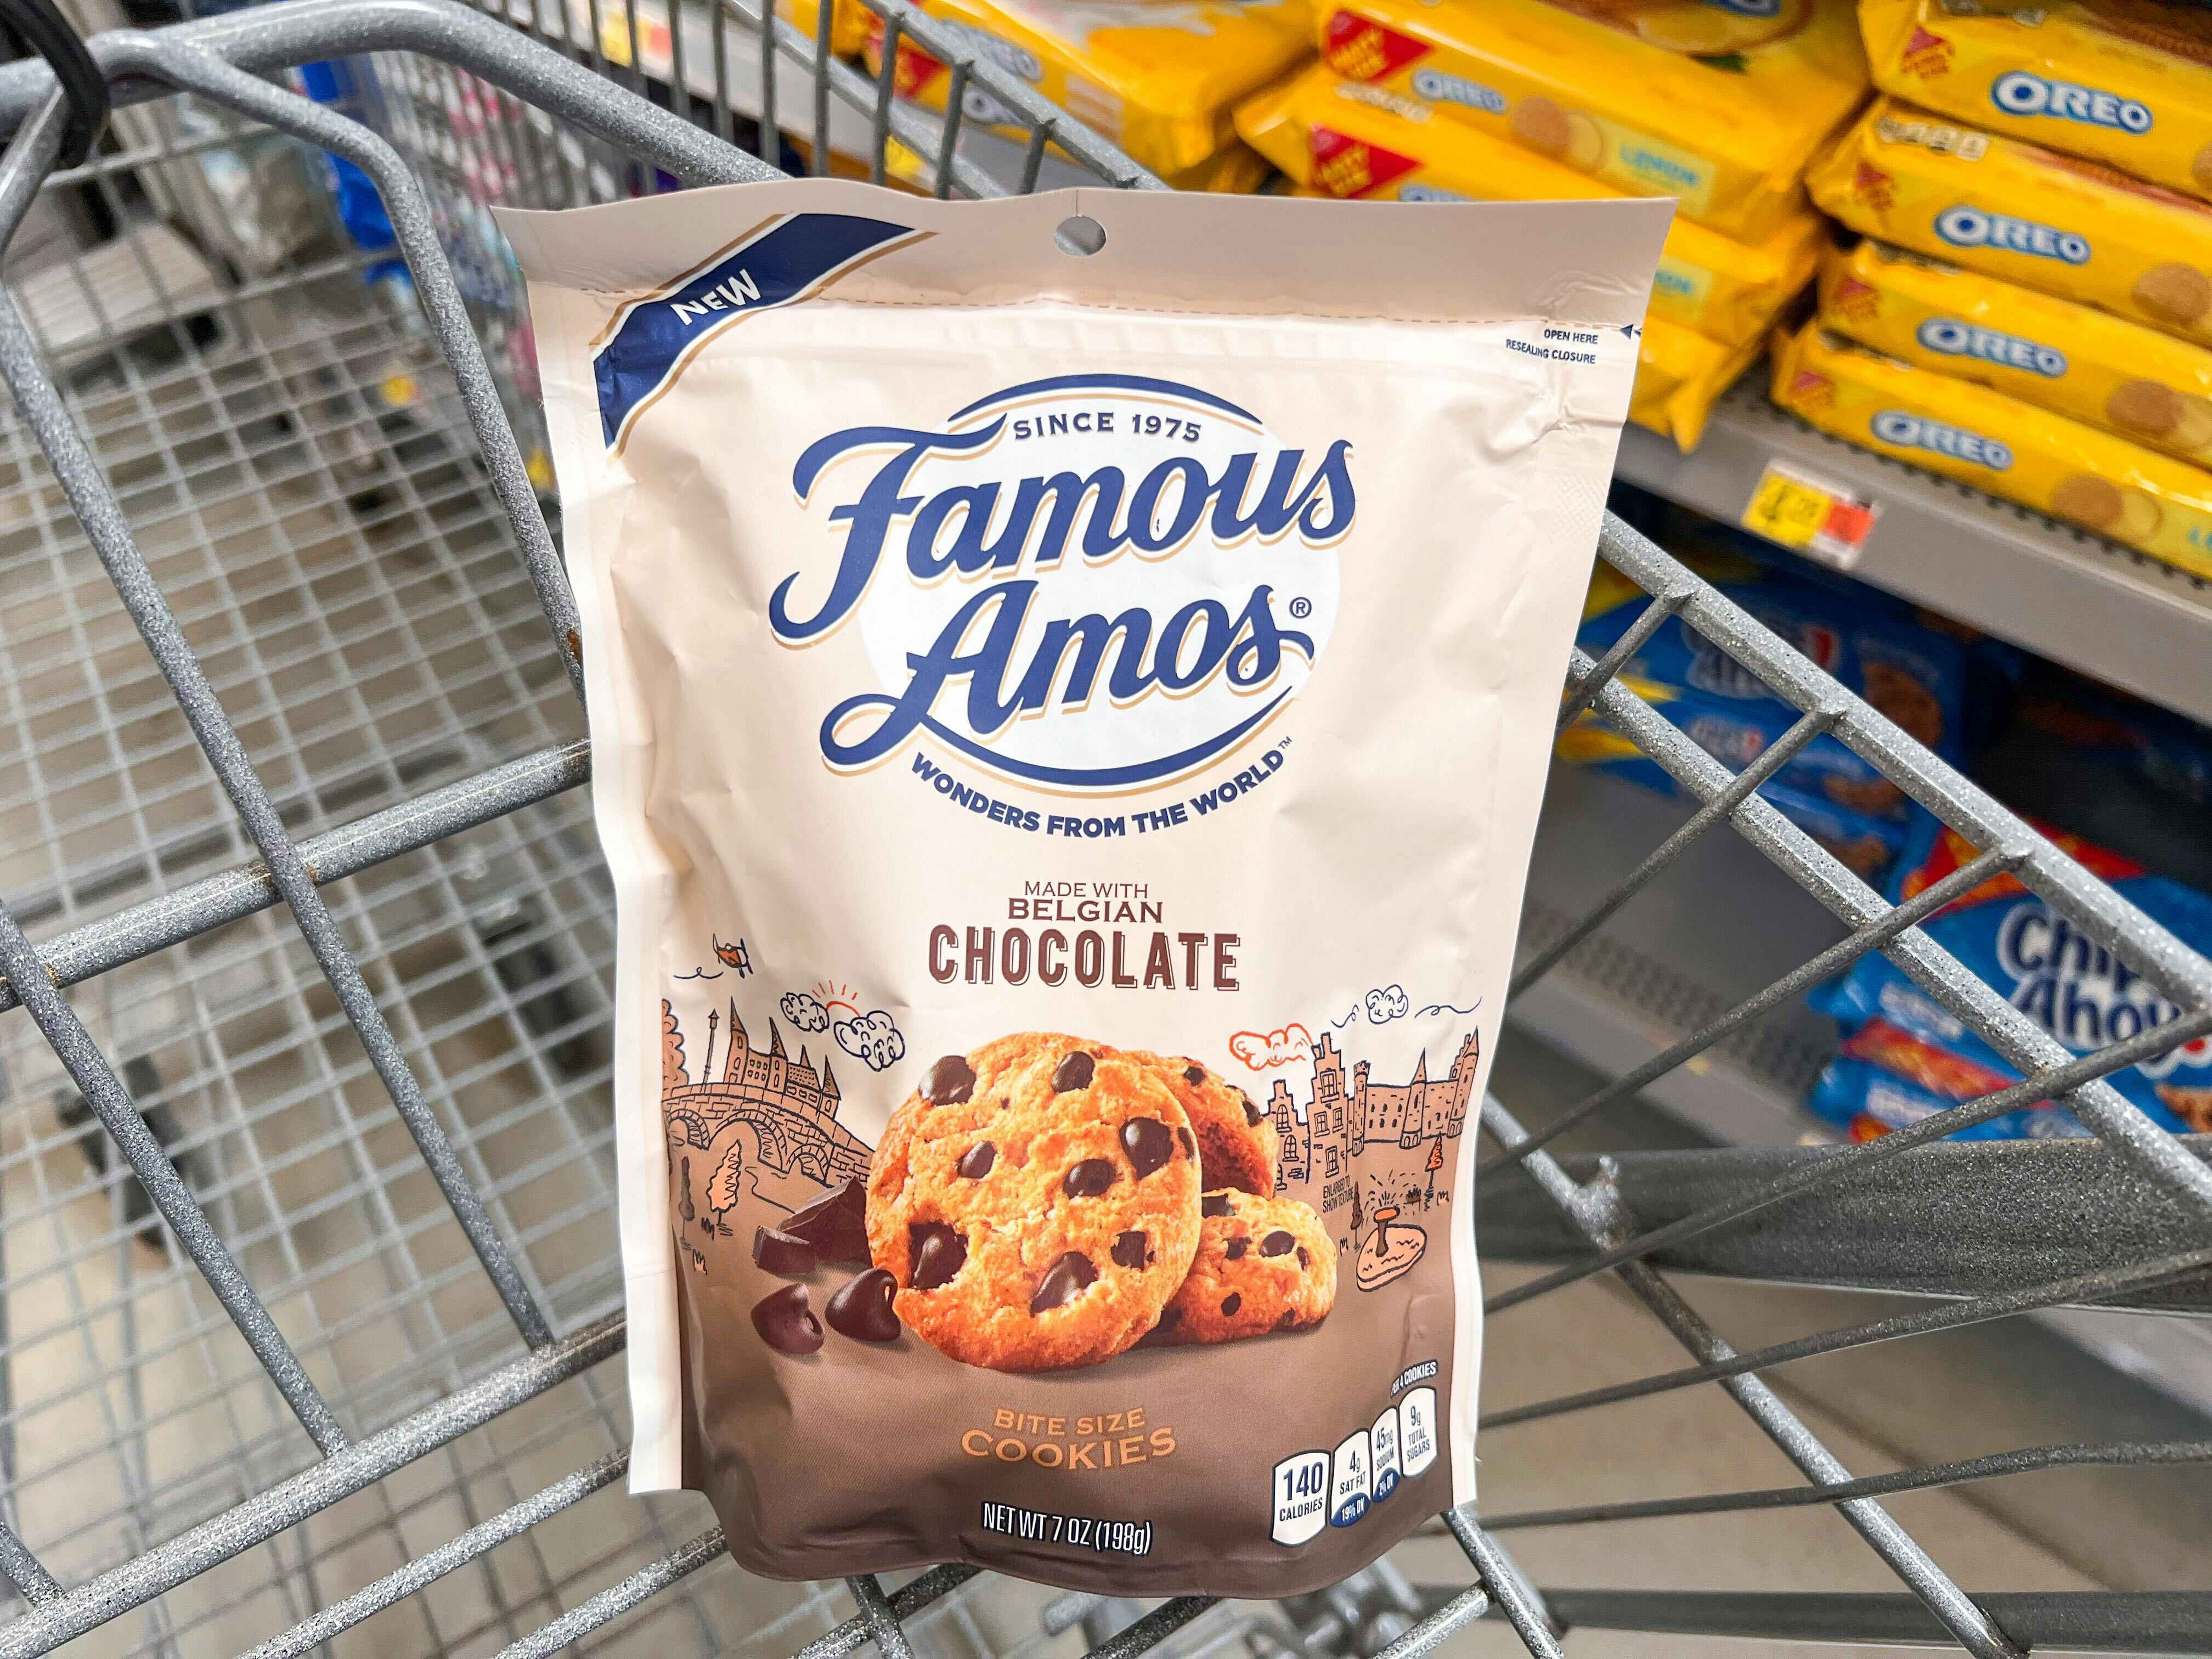 Seven-ounce package of Famous Amos Cookies in Walmart shopping cart